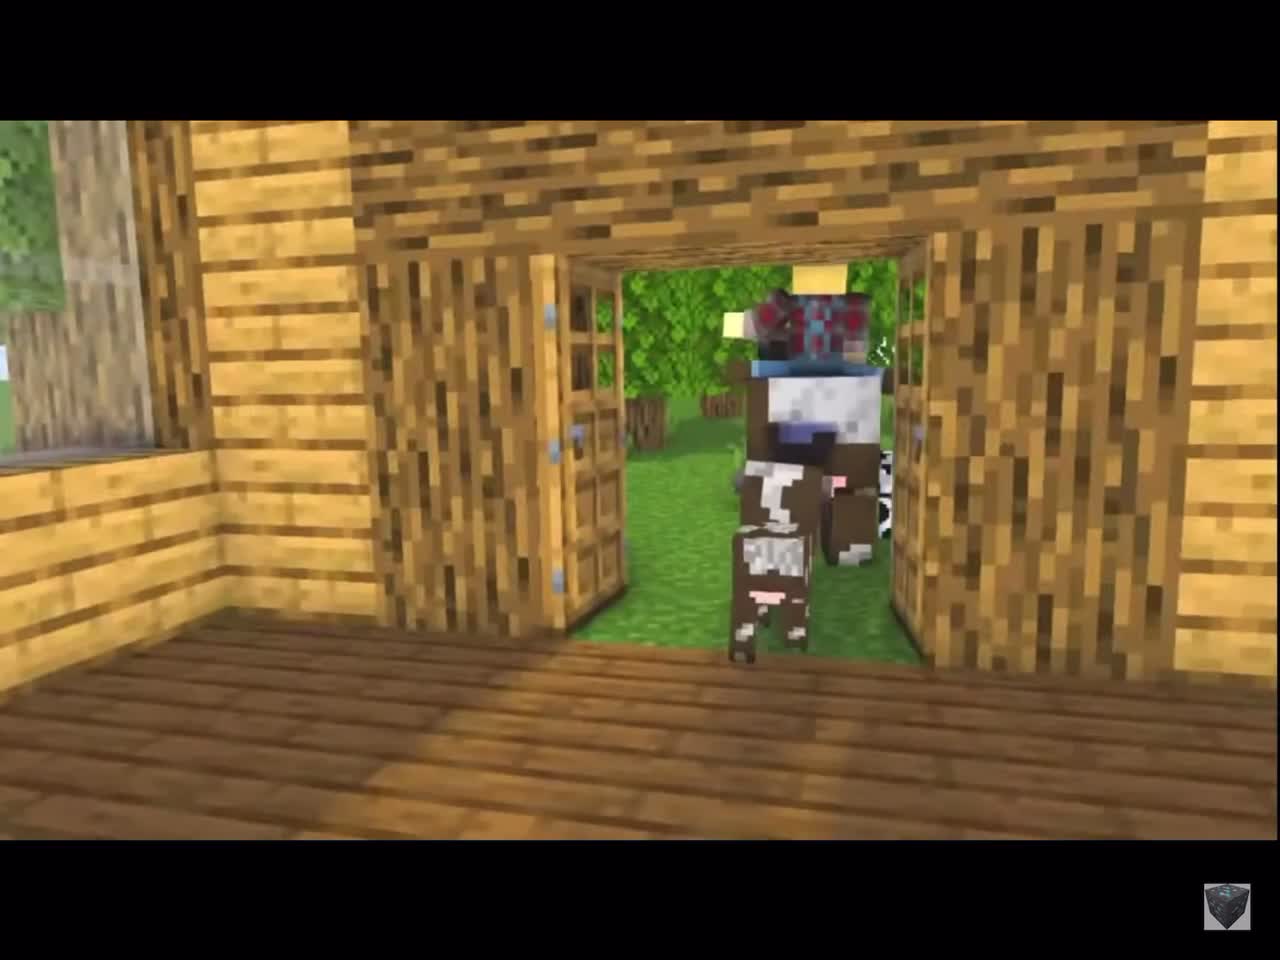 Minecraft love animation gone sexual 😘🥰😍😘🥰😍